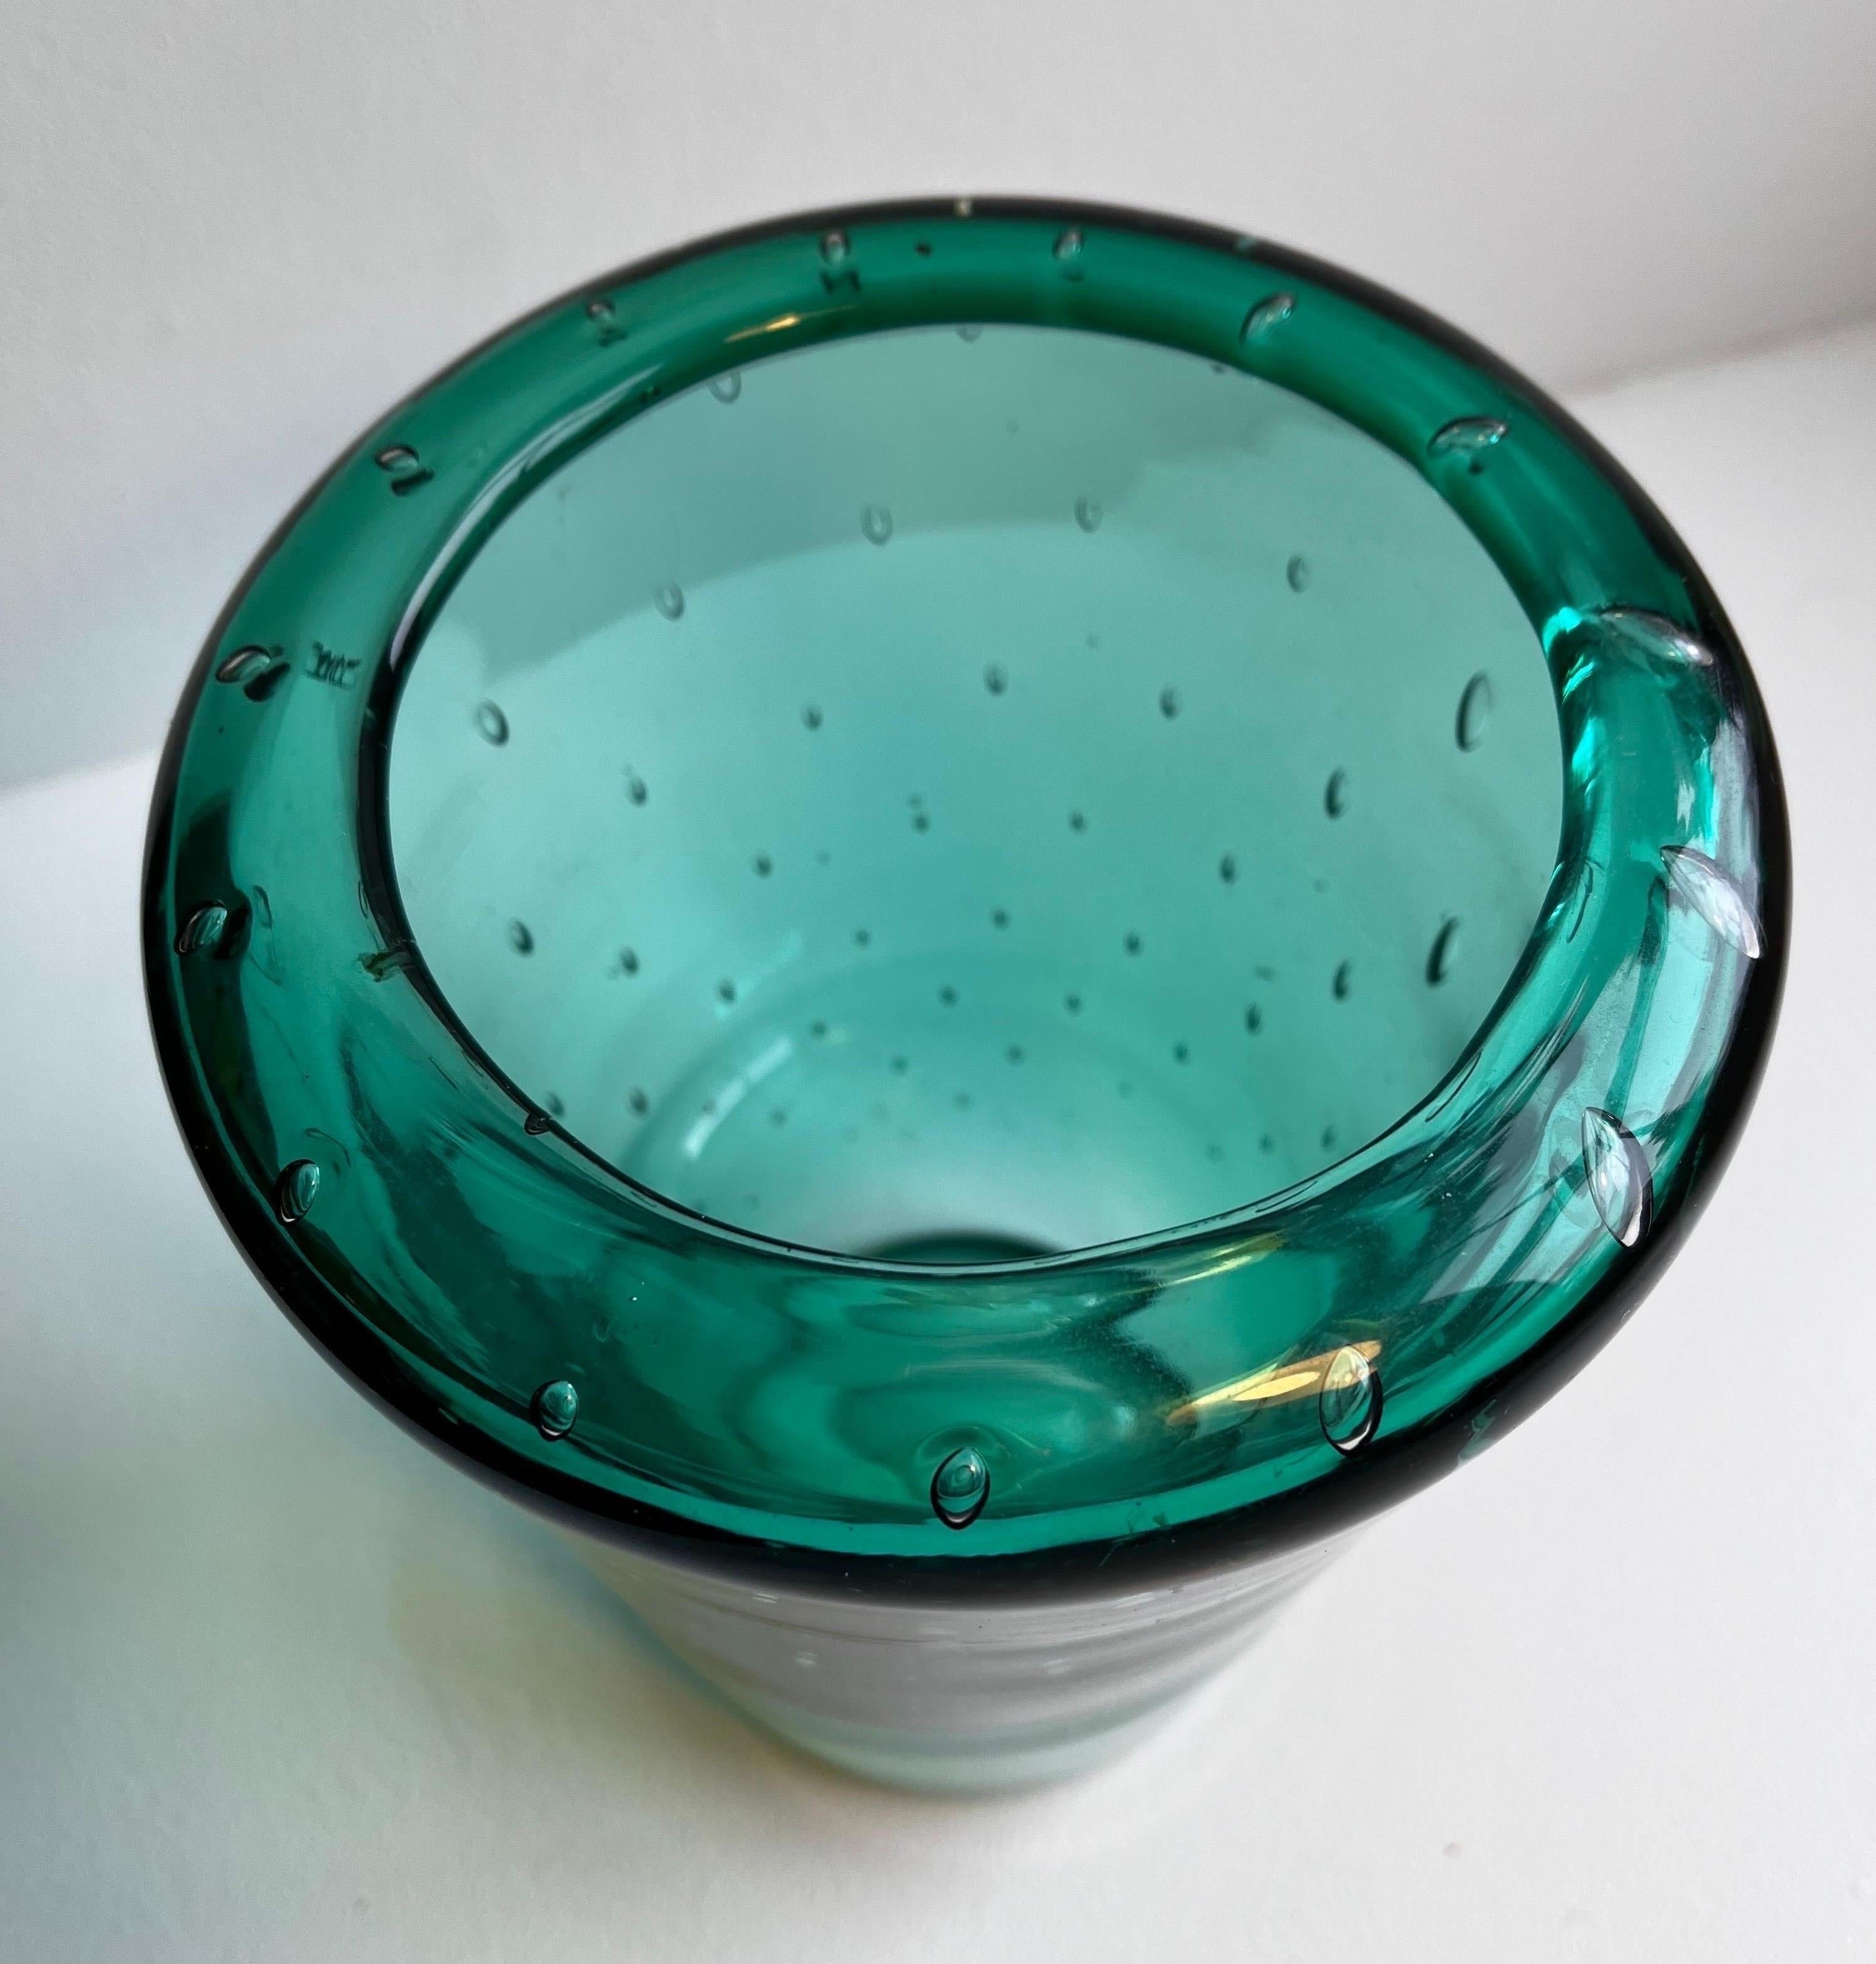 American Green Blenko Vase with Air Bubbles, 1950s